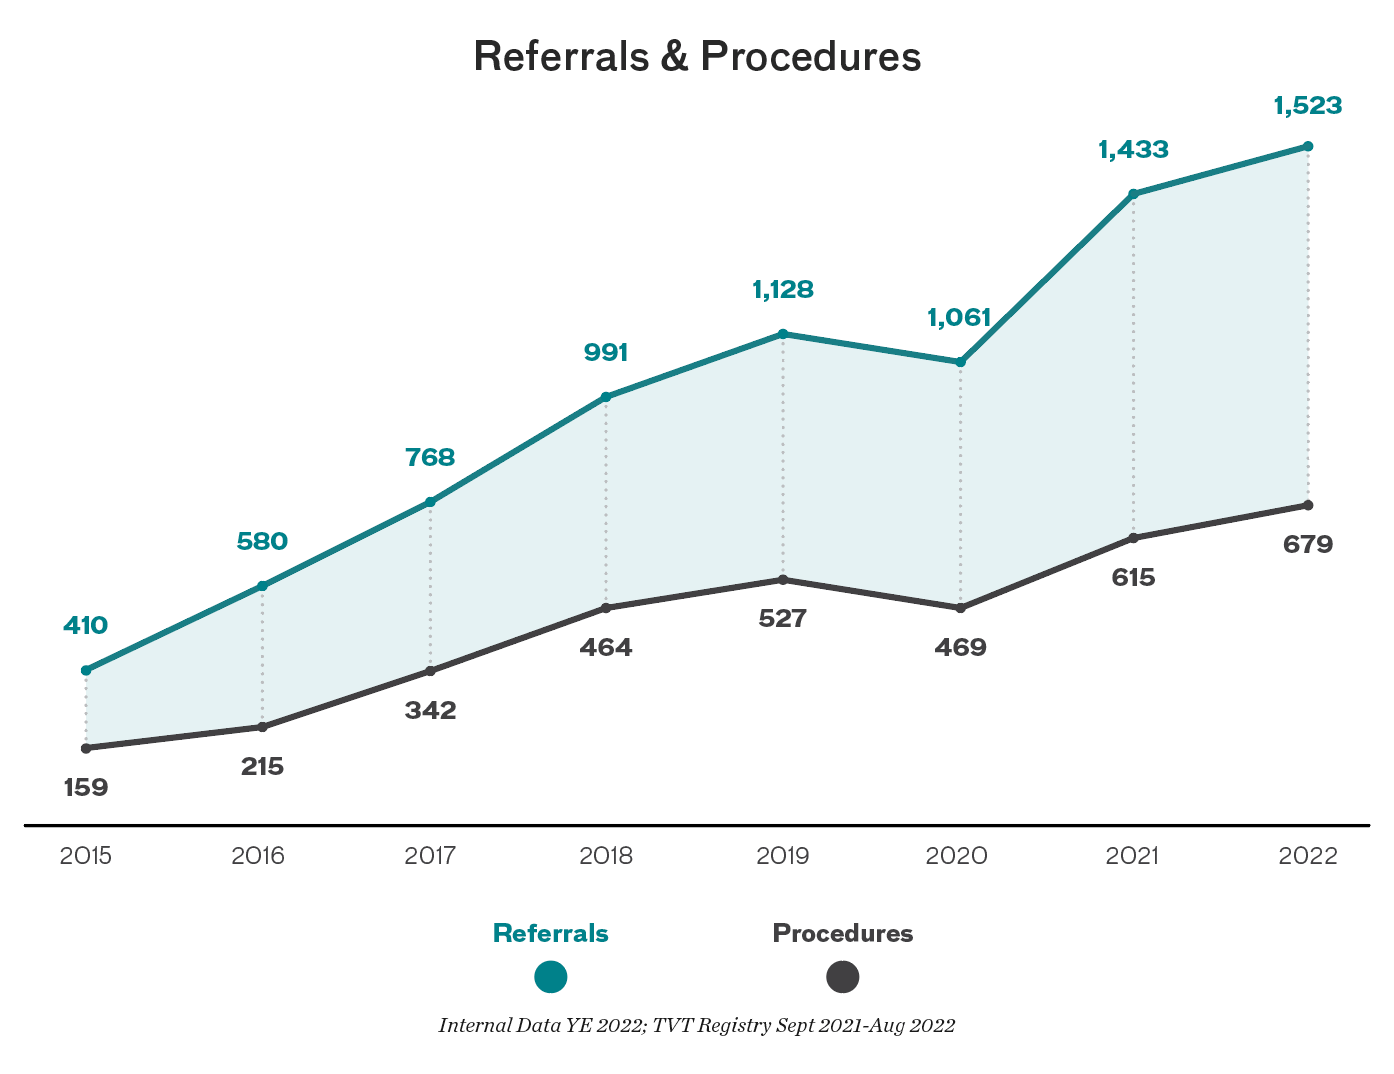 Line chart depicting increasing referrals and procedures for structural heart and valve, from 410 referrals and 159 procedures in 2015, to 1,523 referrals and 679 procedures in 2022.